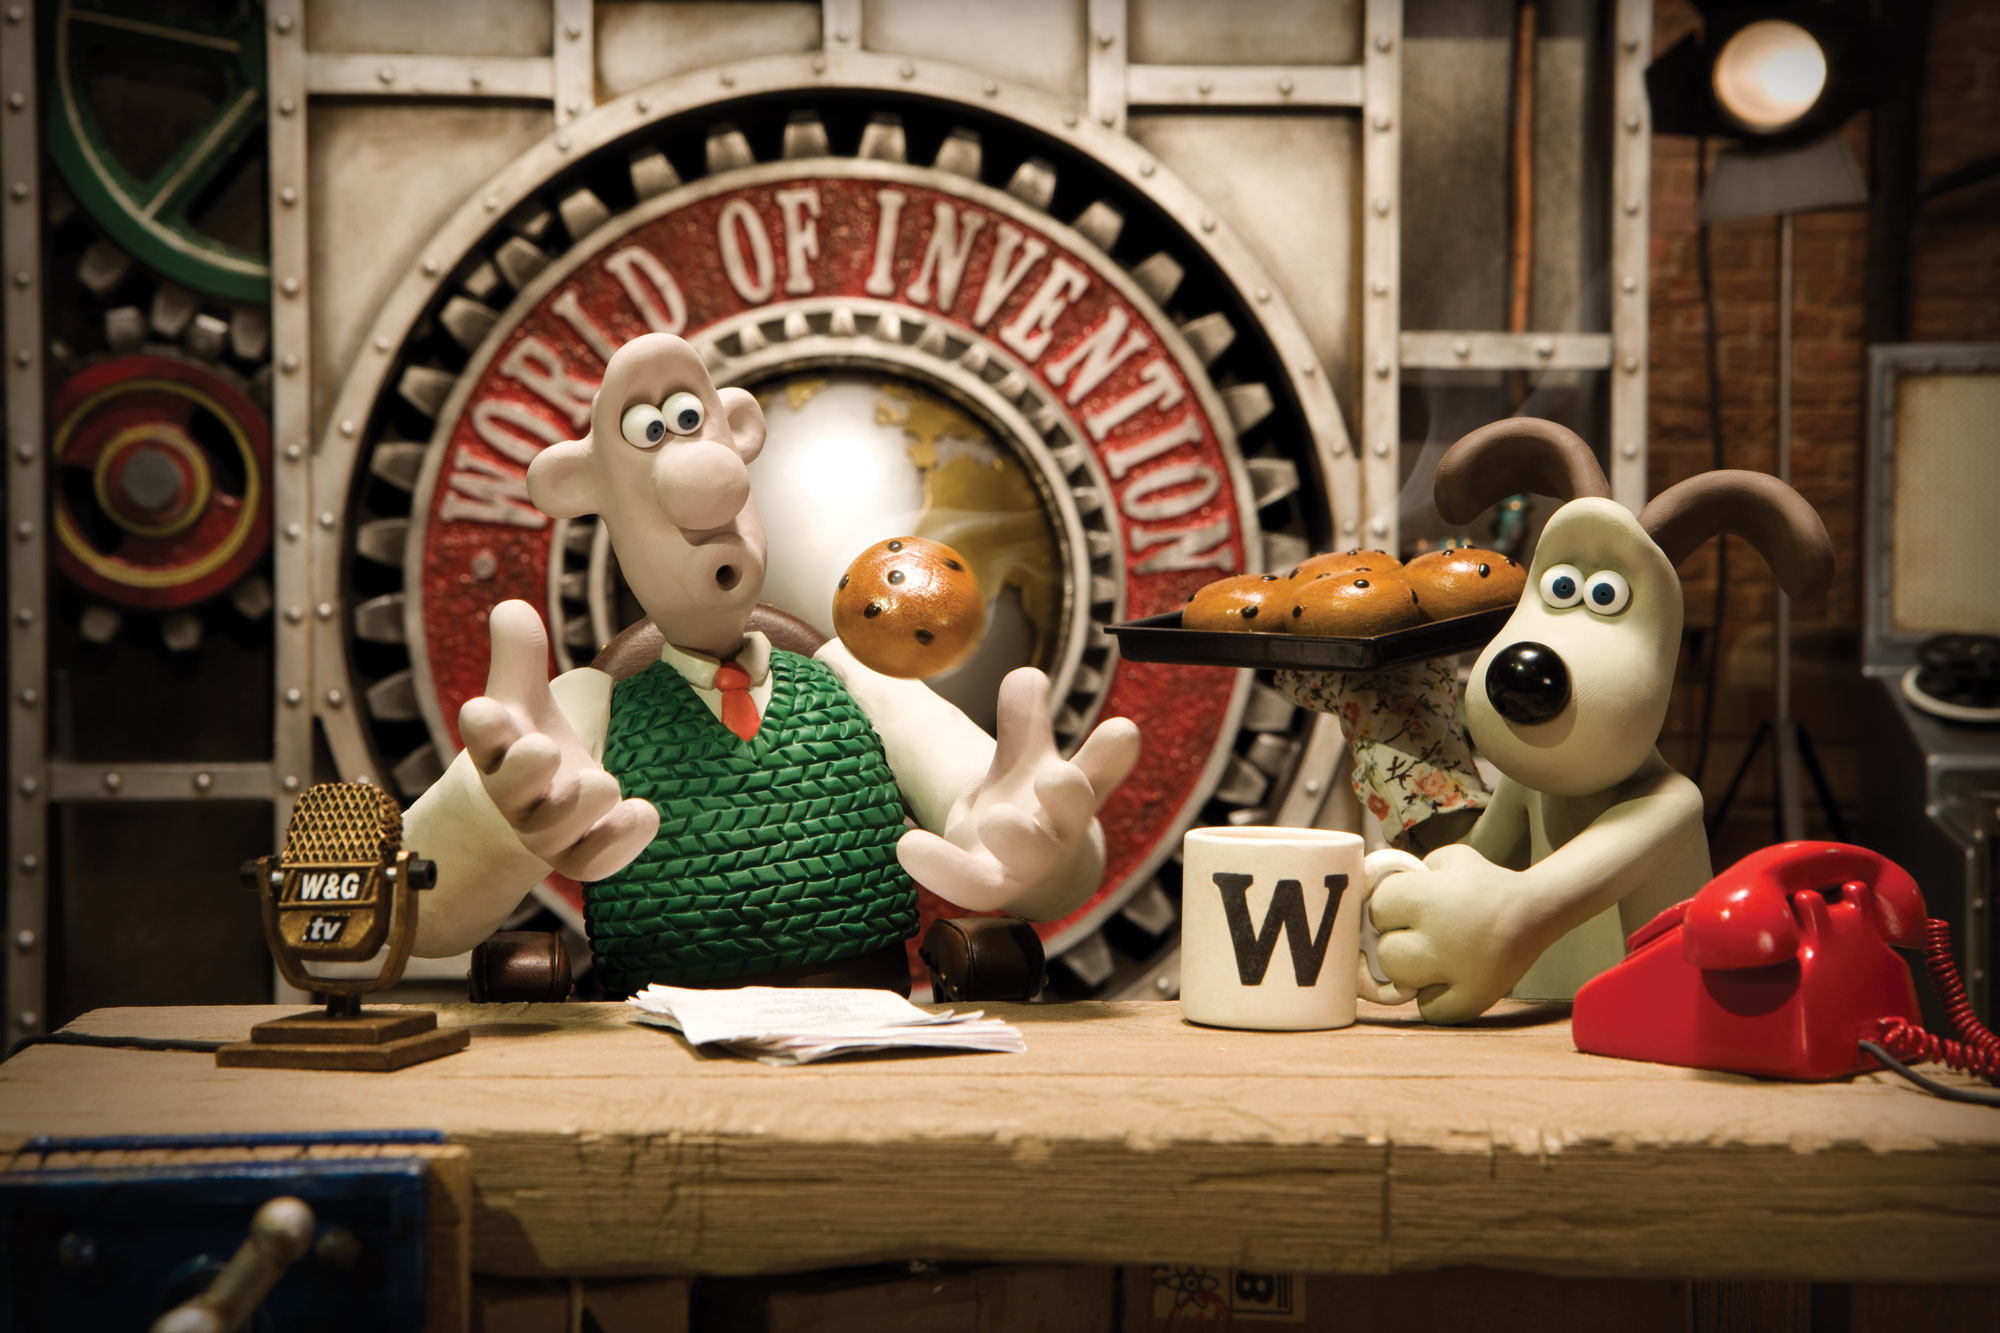 2000x1333 Wallace & Gromit's World of Invention TV Show